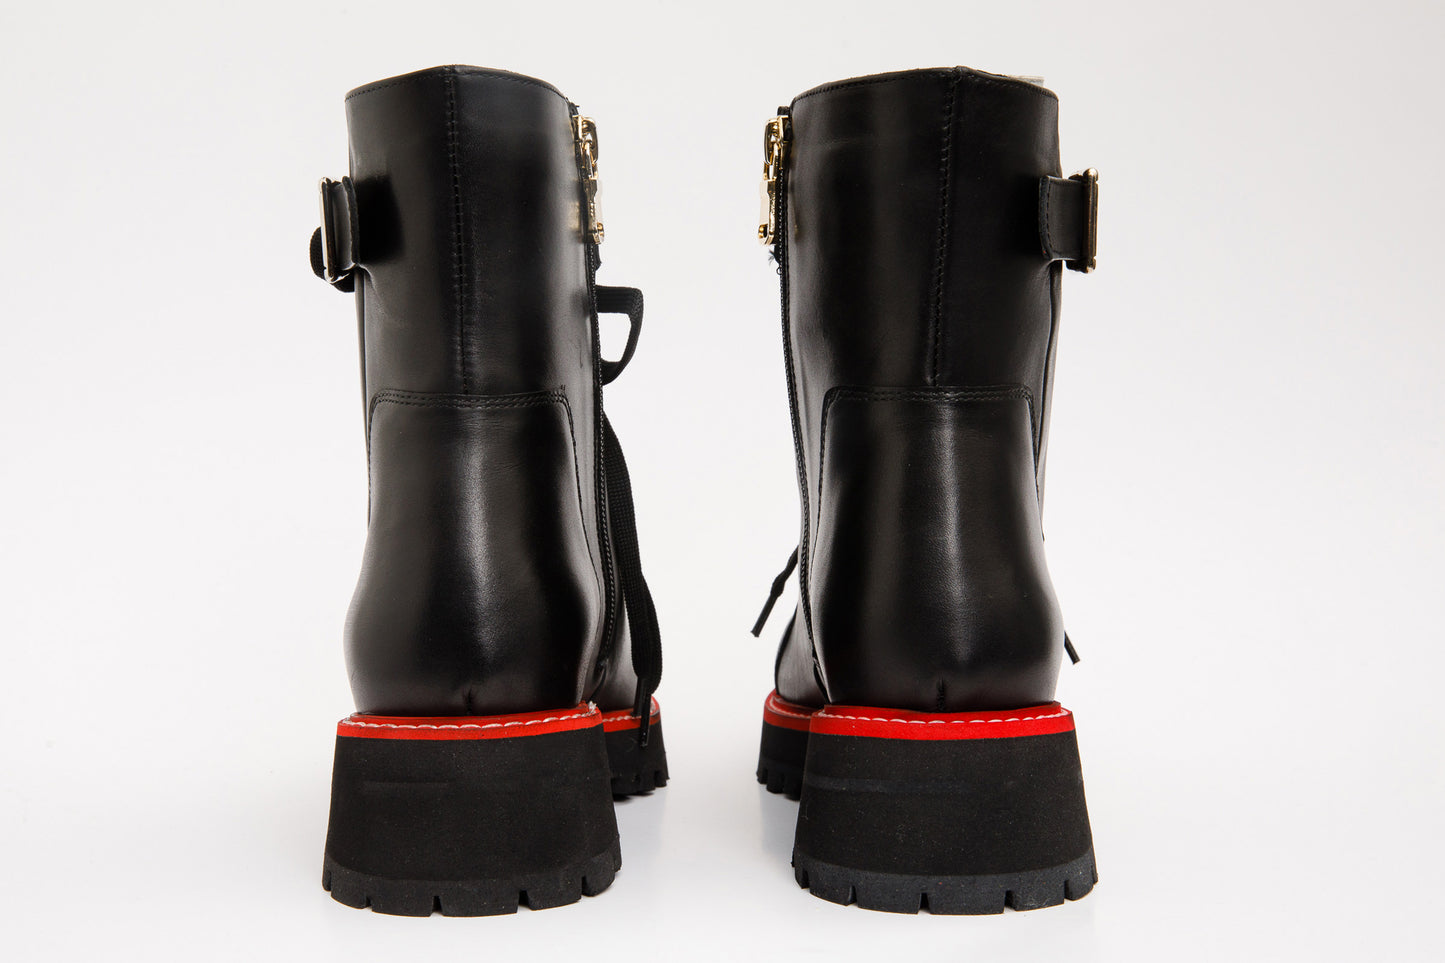 The Belgrano Black Leather Lace-Up Ankle Women Boot With a Side Zipper